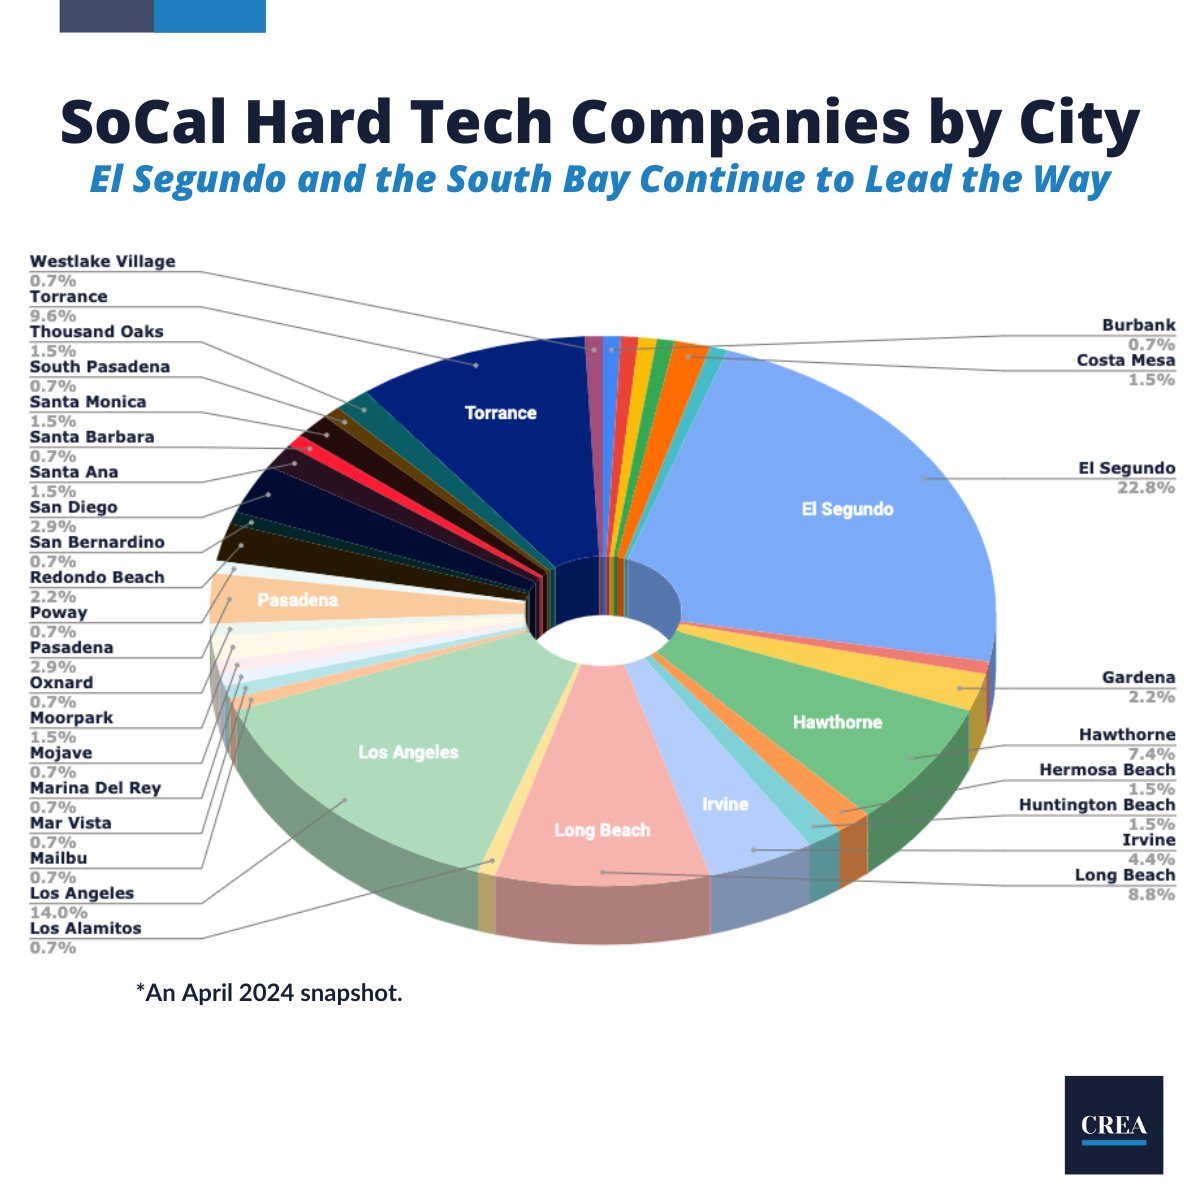 If you were wondering which SoCal city has the most hard tech companies by percentage (over 135 companies), see below pie chart! To receive the MAP showing you which hard tech companies are where, comment 'map' below or dm me.